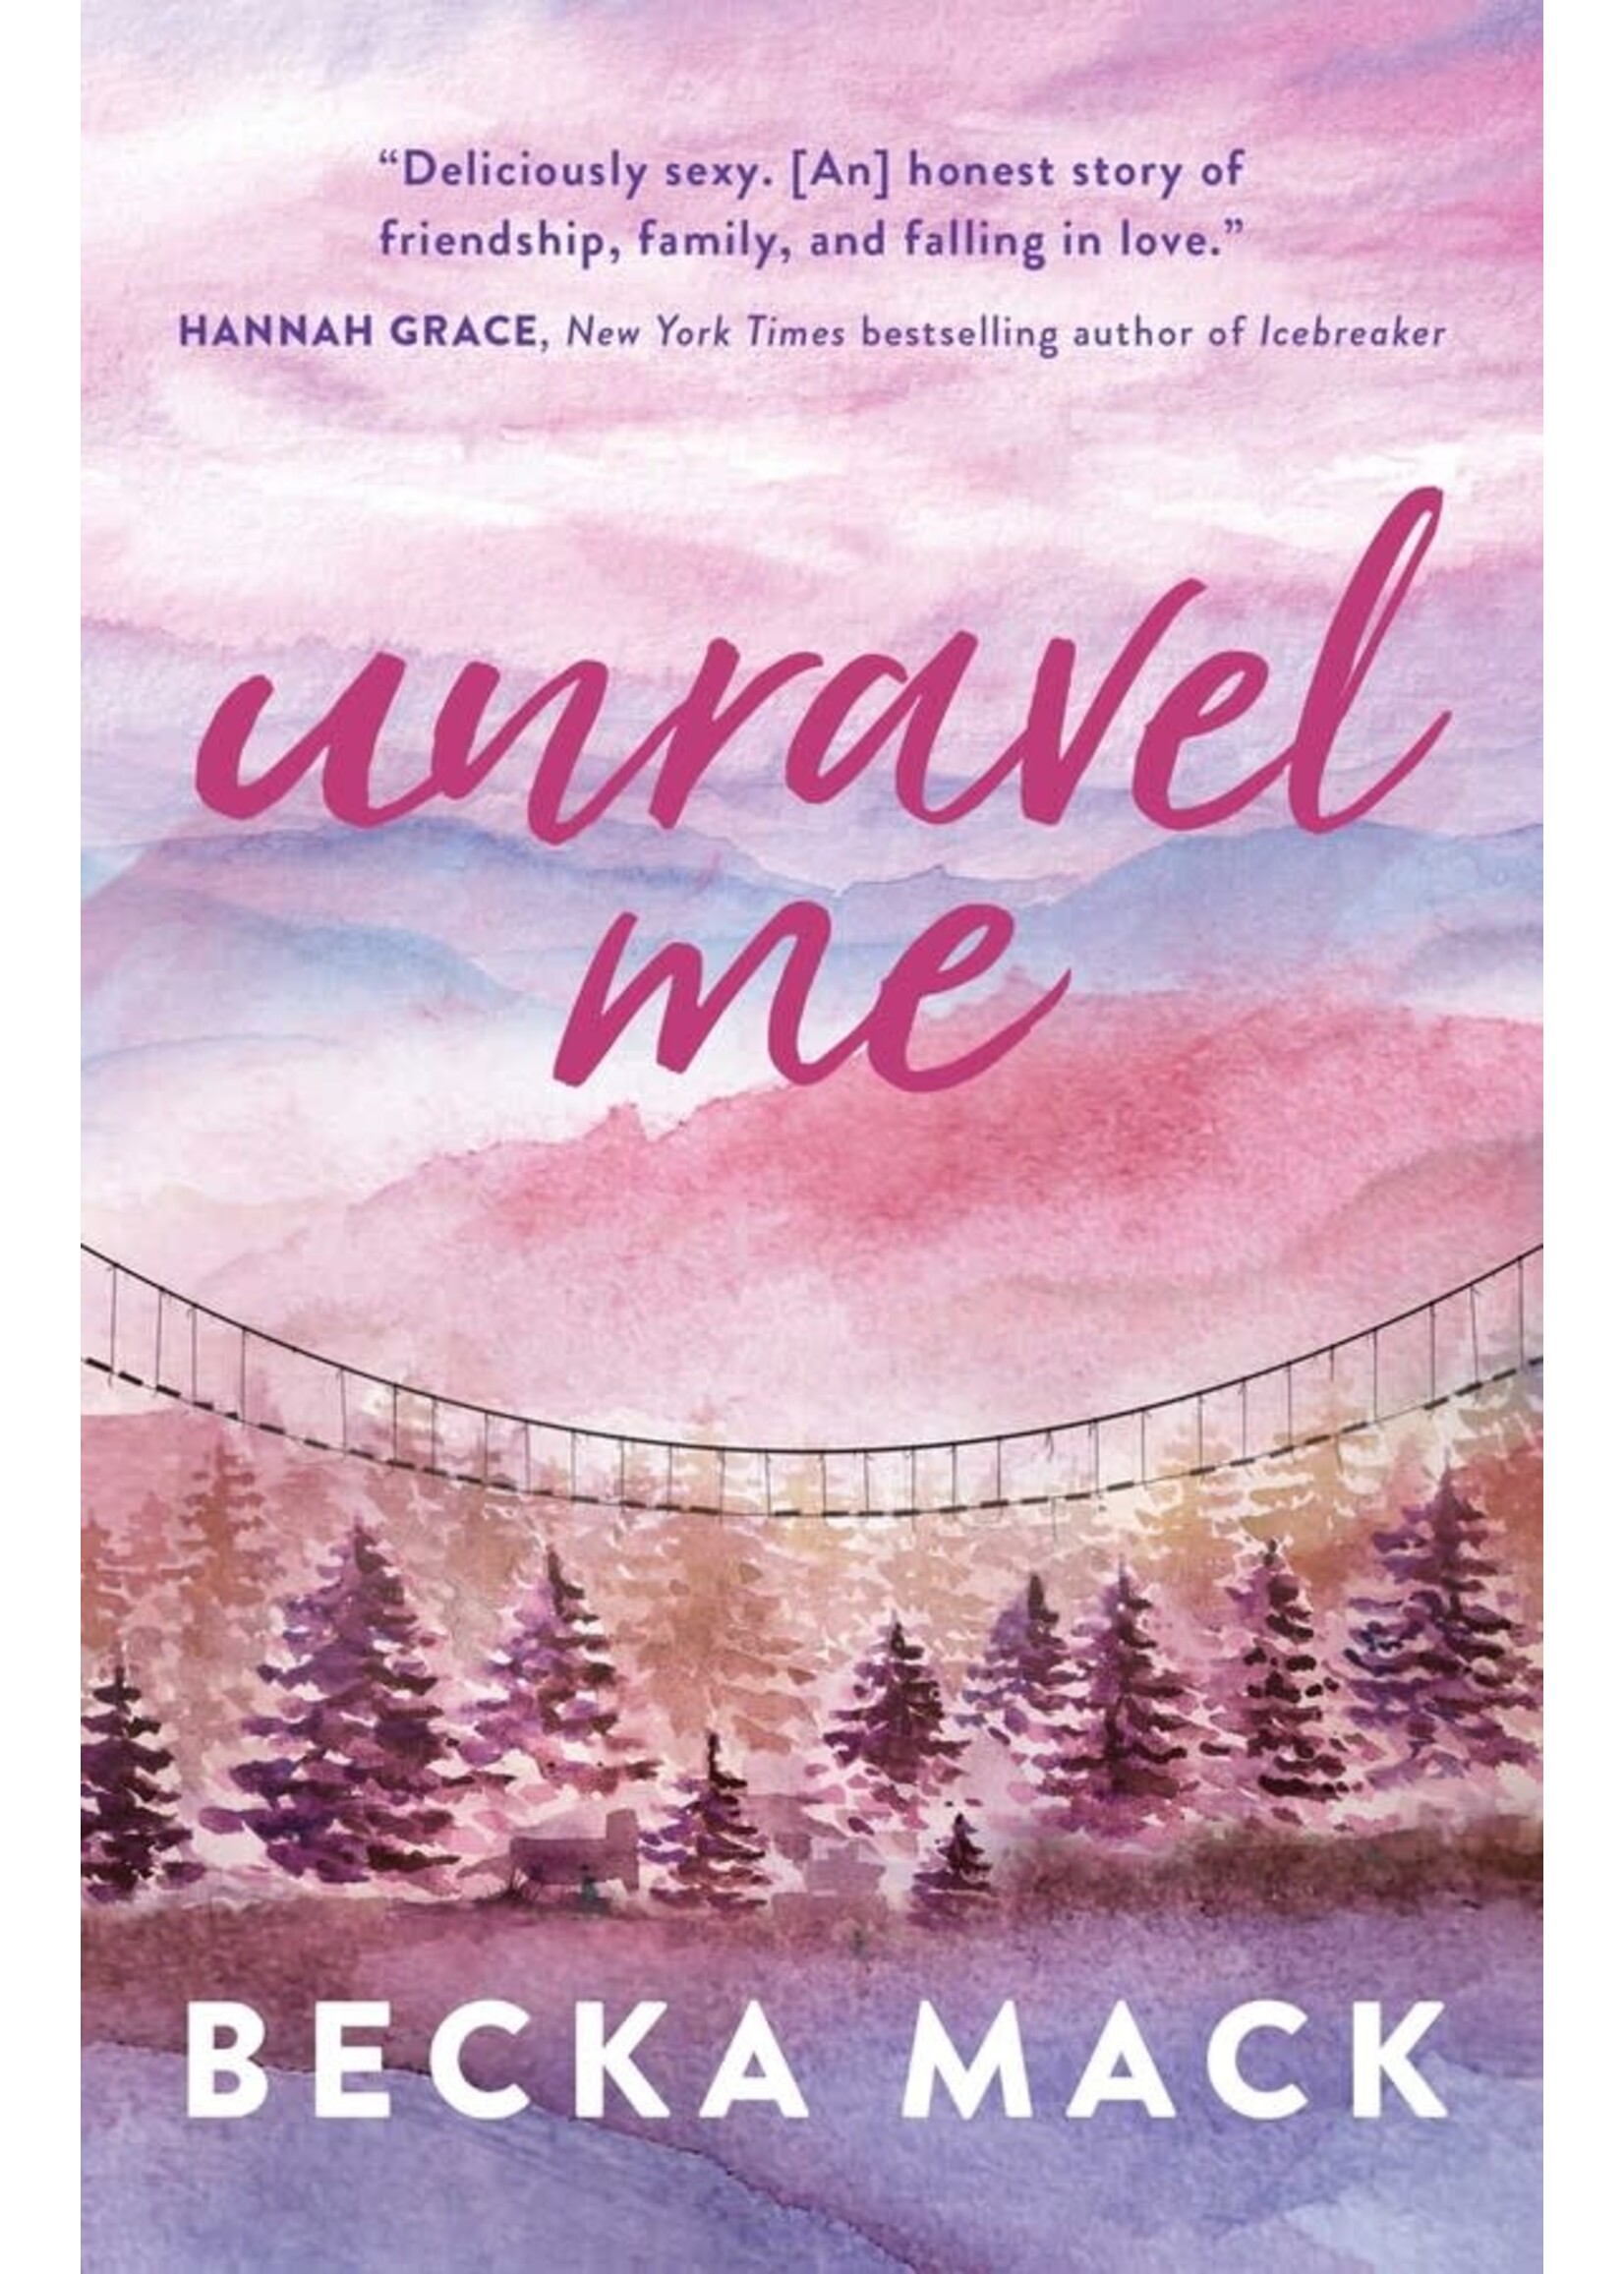 Unravel Me (Playing for Keeps #3) by Becka Mack